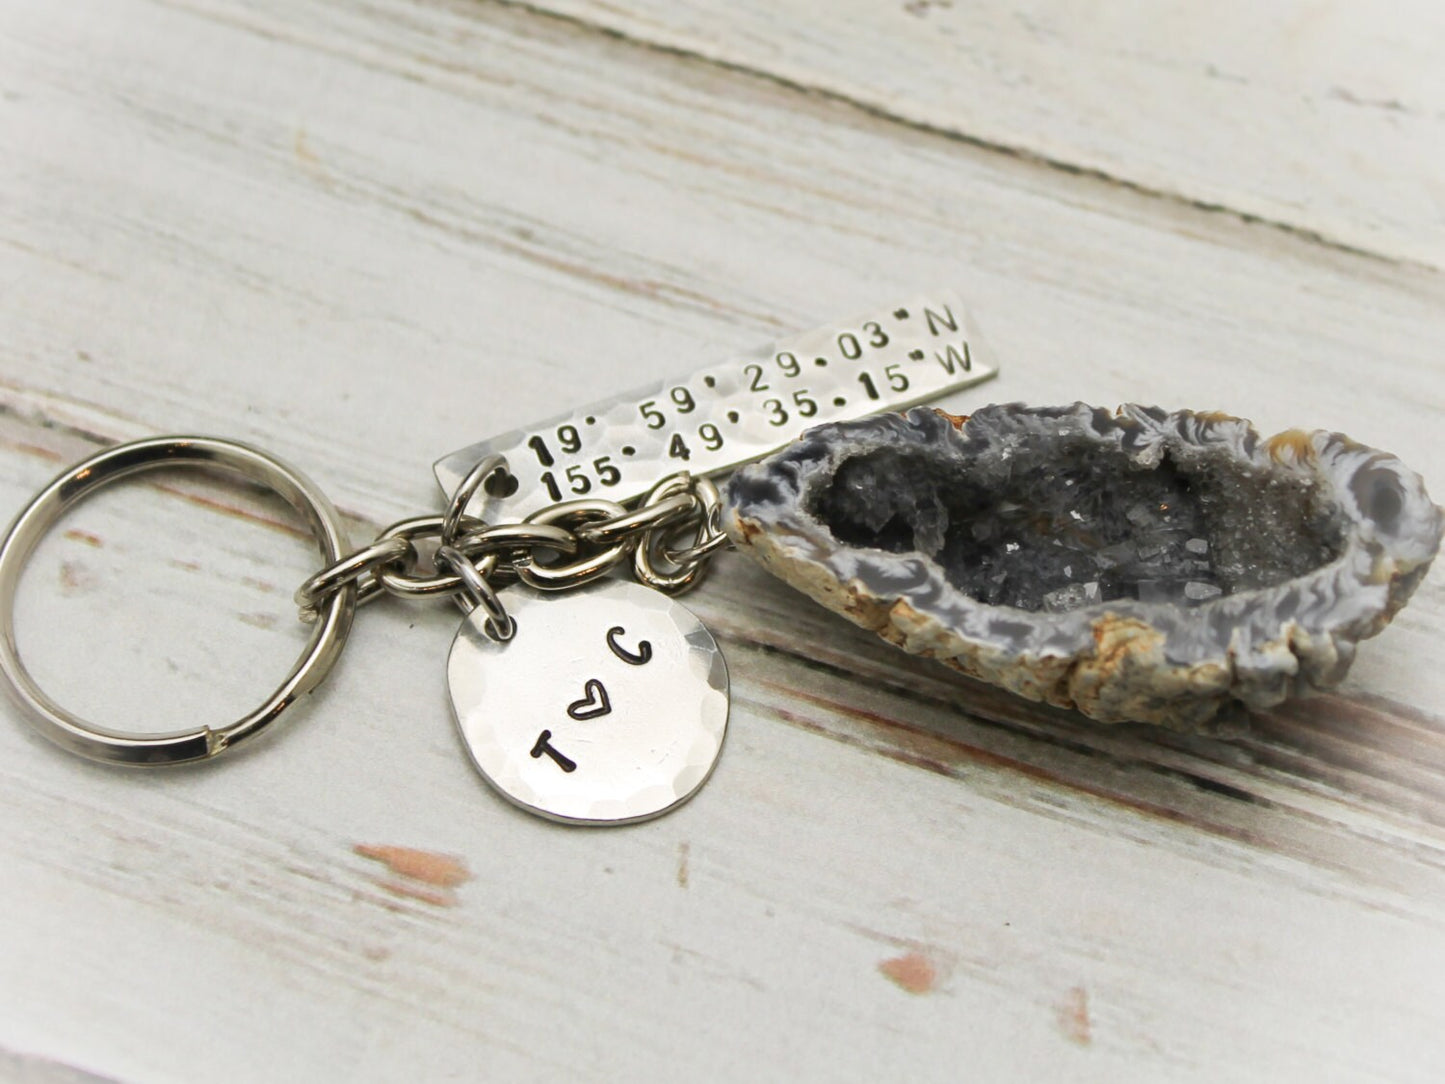 Latitude and Longitude Keychain, Coordinates Key Chain, Geode Keychain, Engagement Anniversary Gifts, Pewter Hand Stamped Personalized